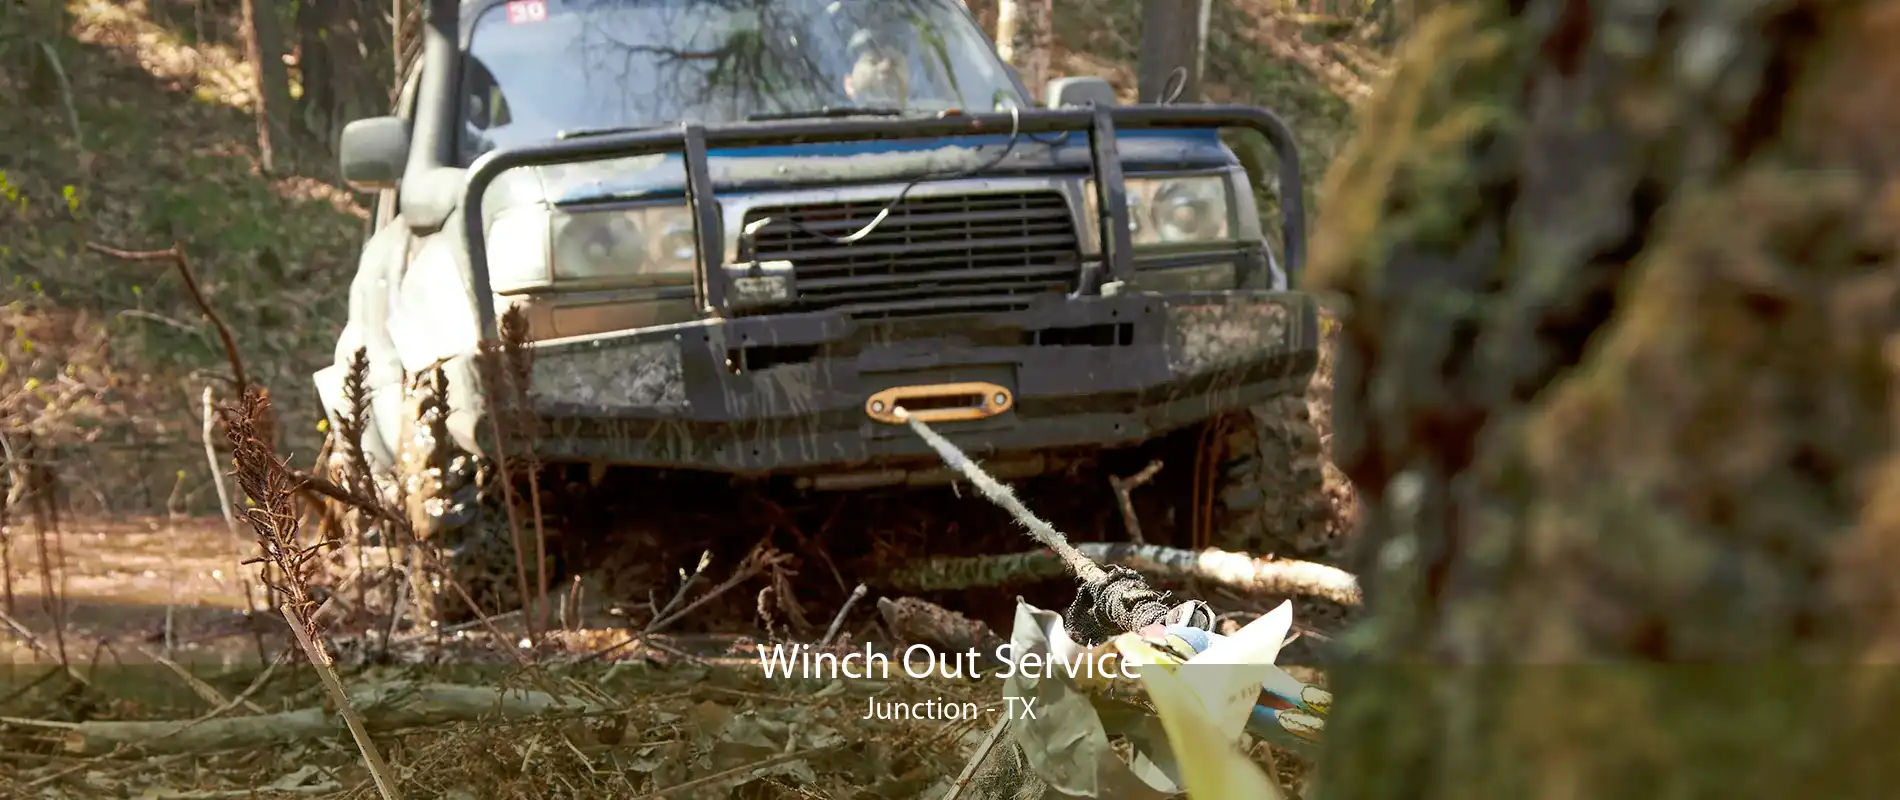 Winch Out Service Junction - TX